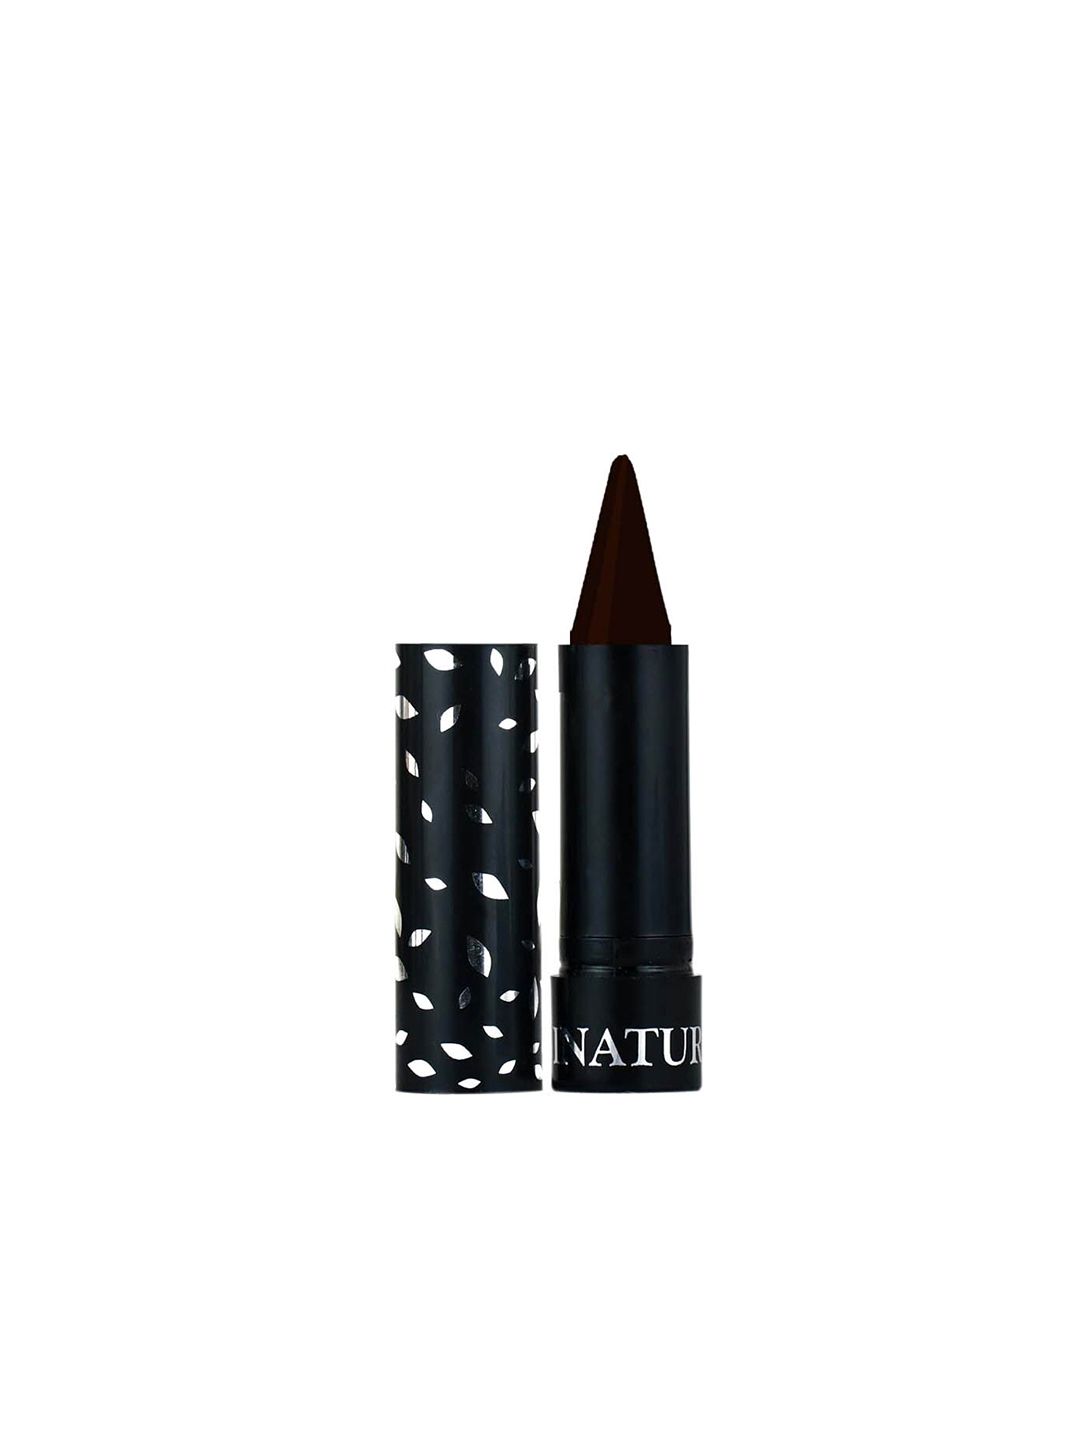 Inatur Brown Smudge Proof Kajal 3.5 g Price in India